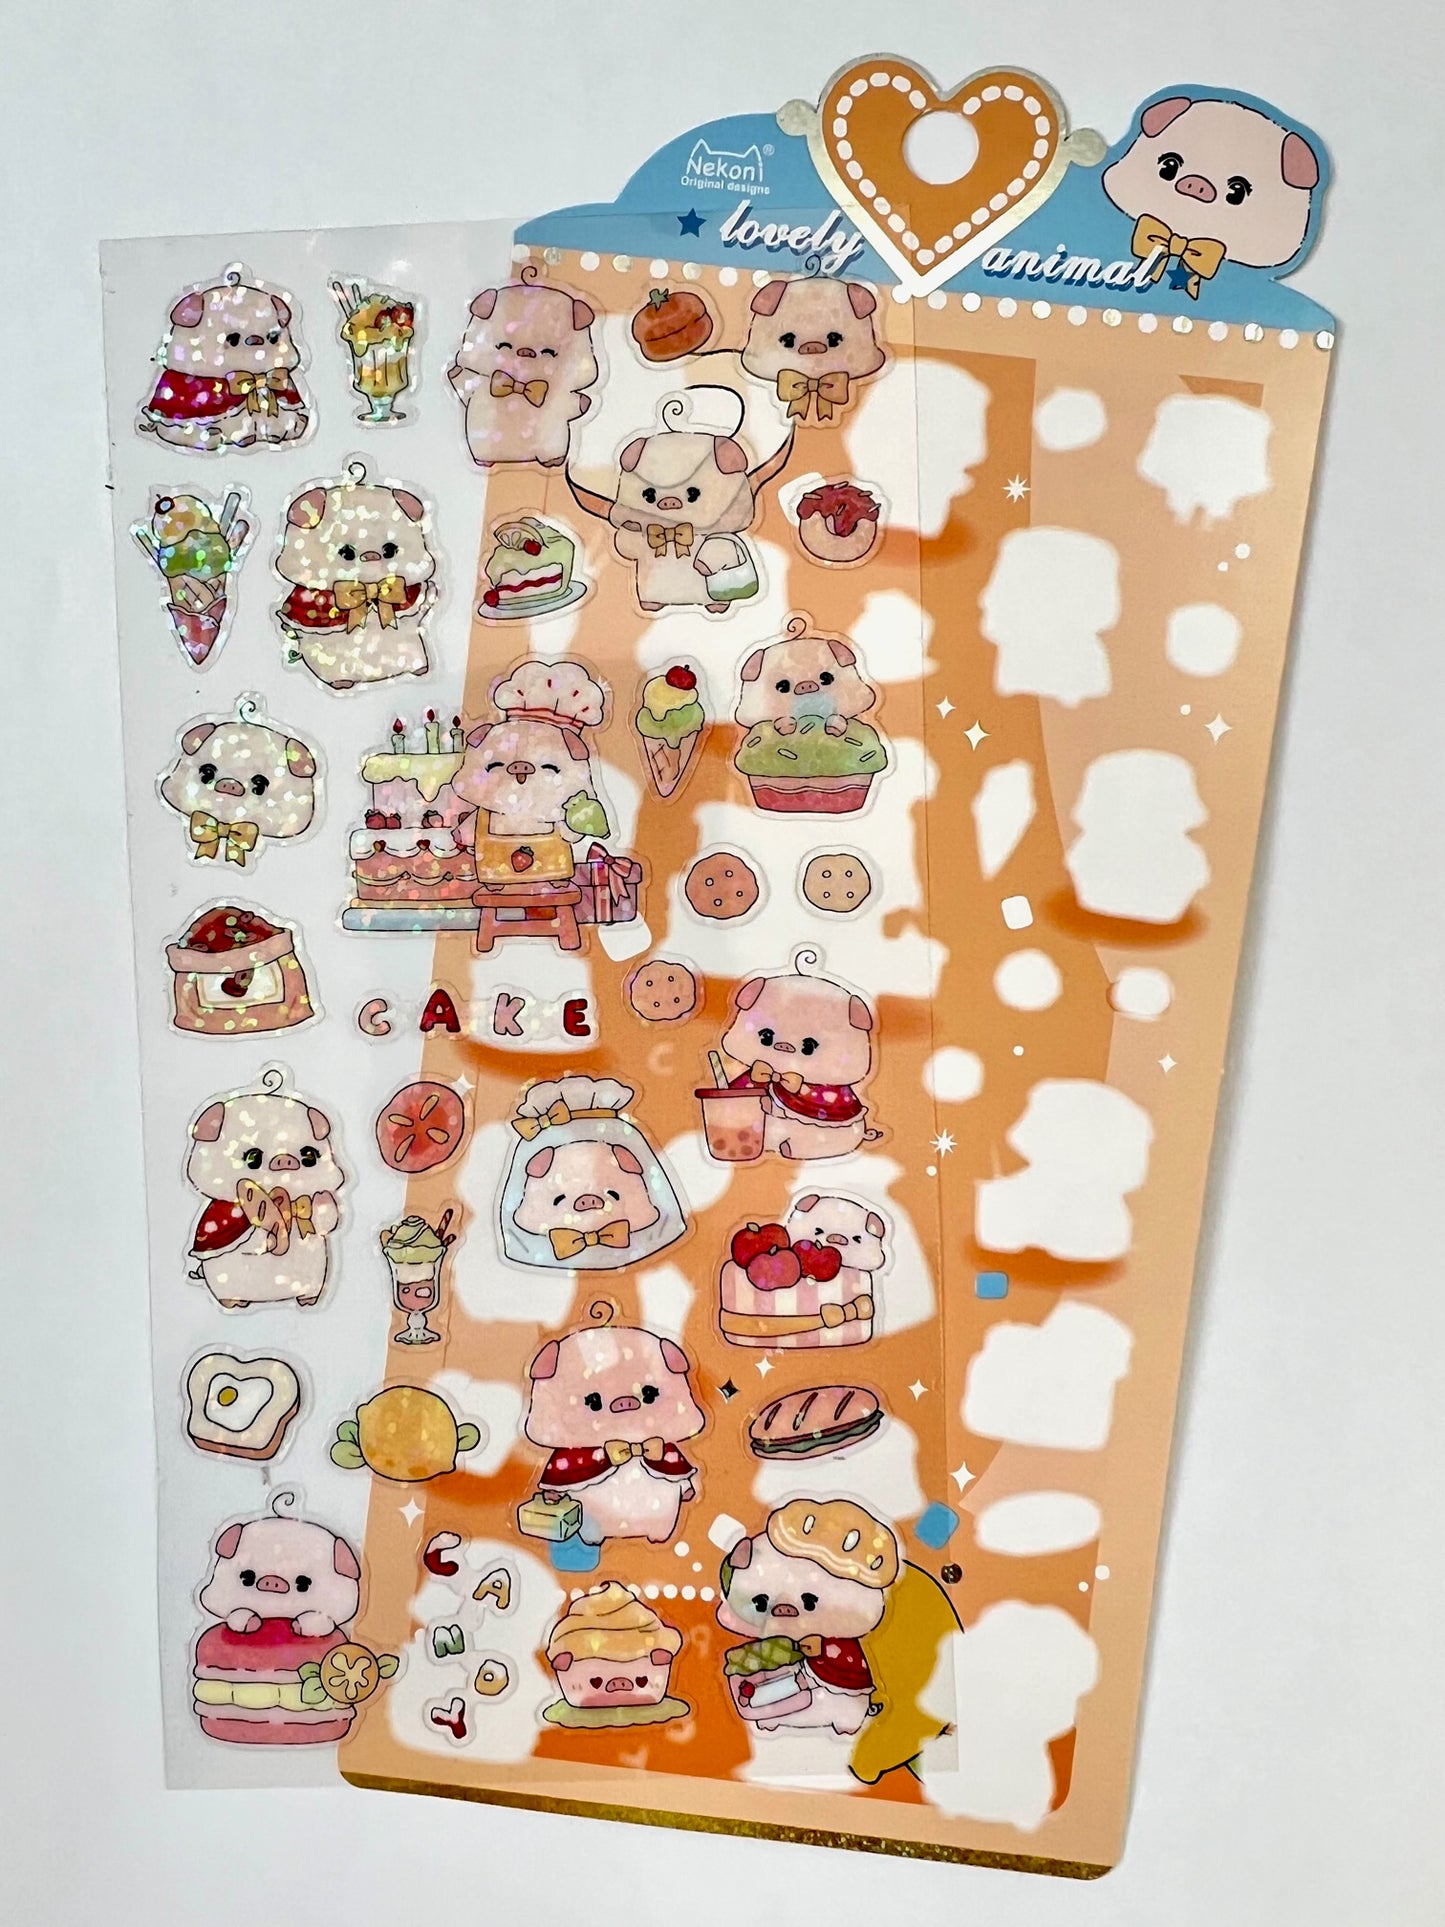 51017 PIG BAKE OFF STICKERS-10